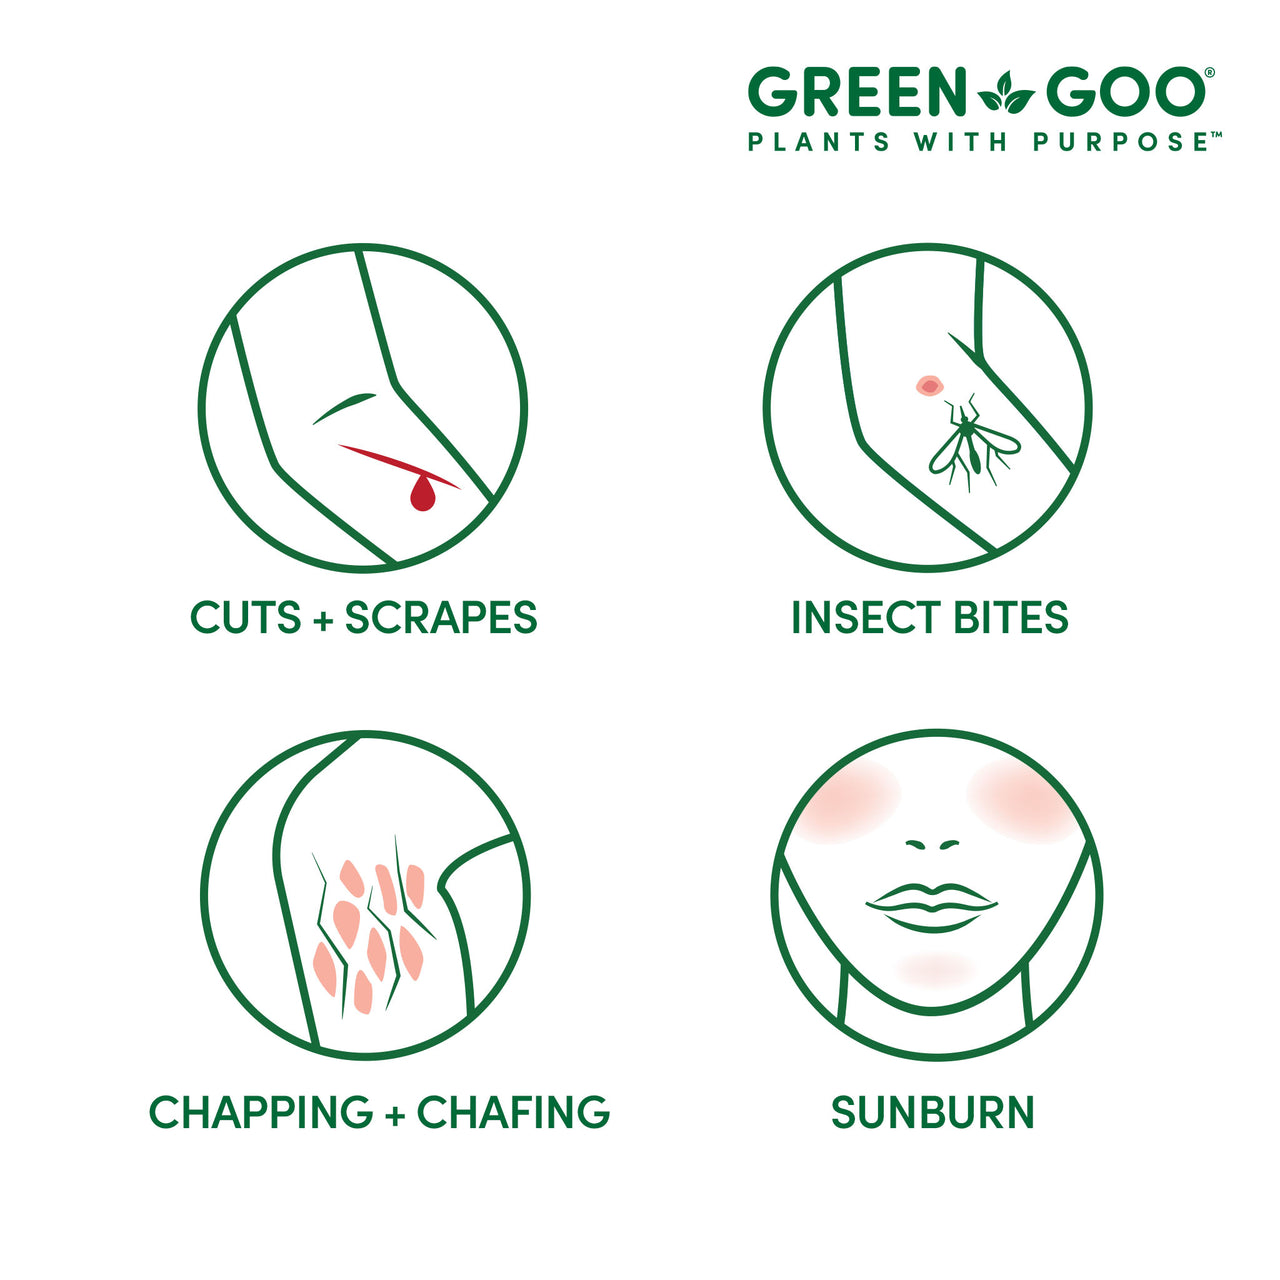 Our first aid salves help against cuts, scrapes, bites, chapping, chafing and sunburns | Green Goo by Sierra Sage Herbs